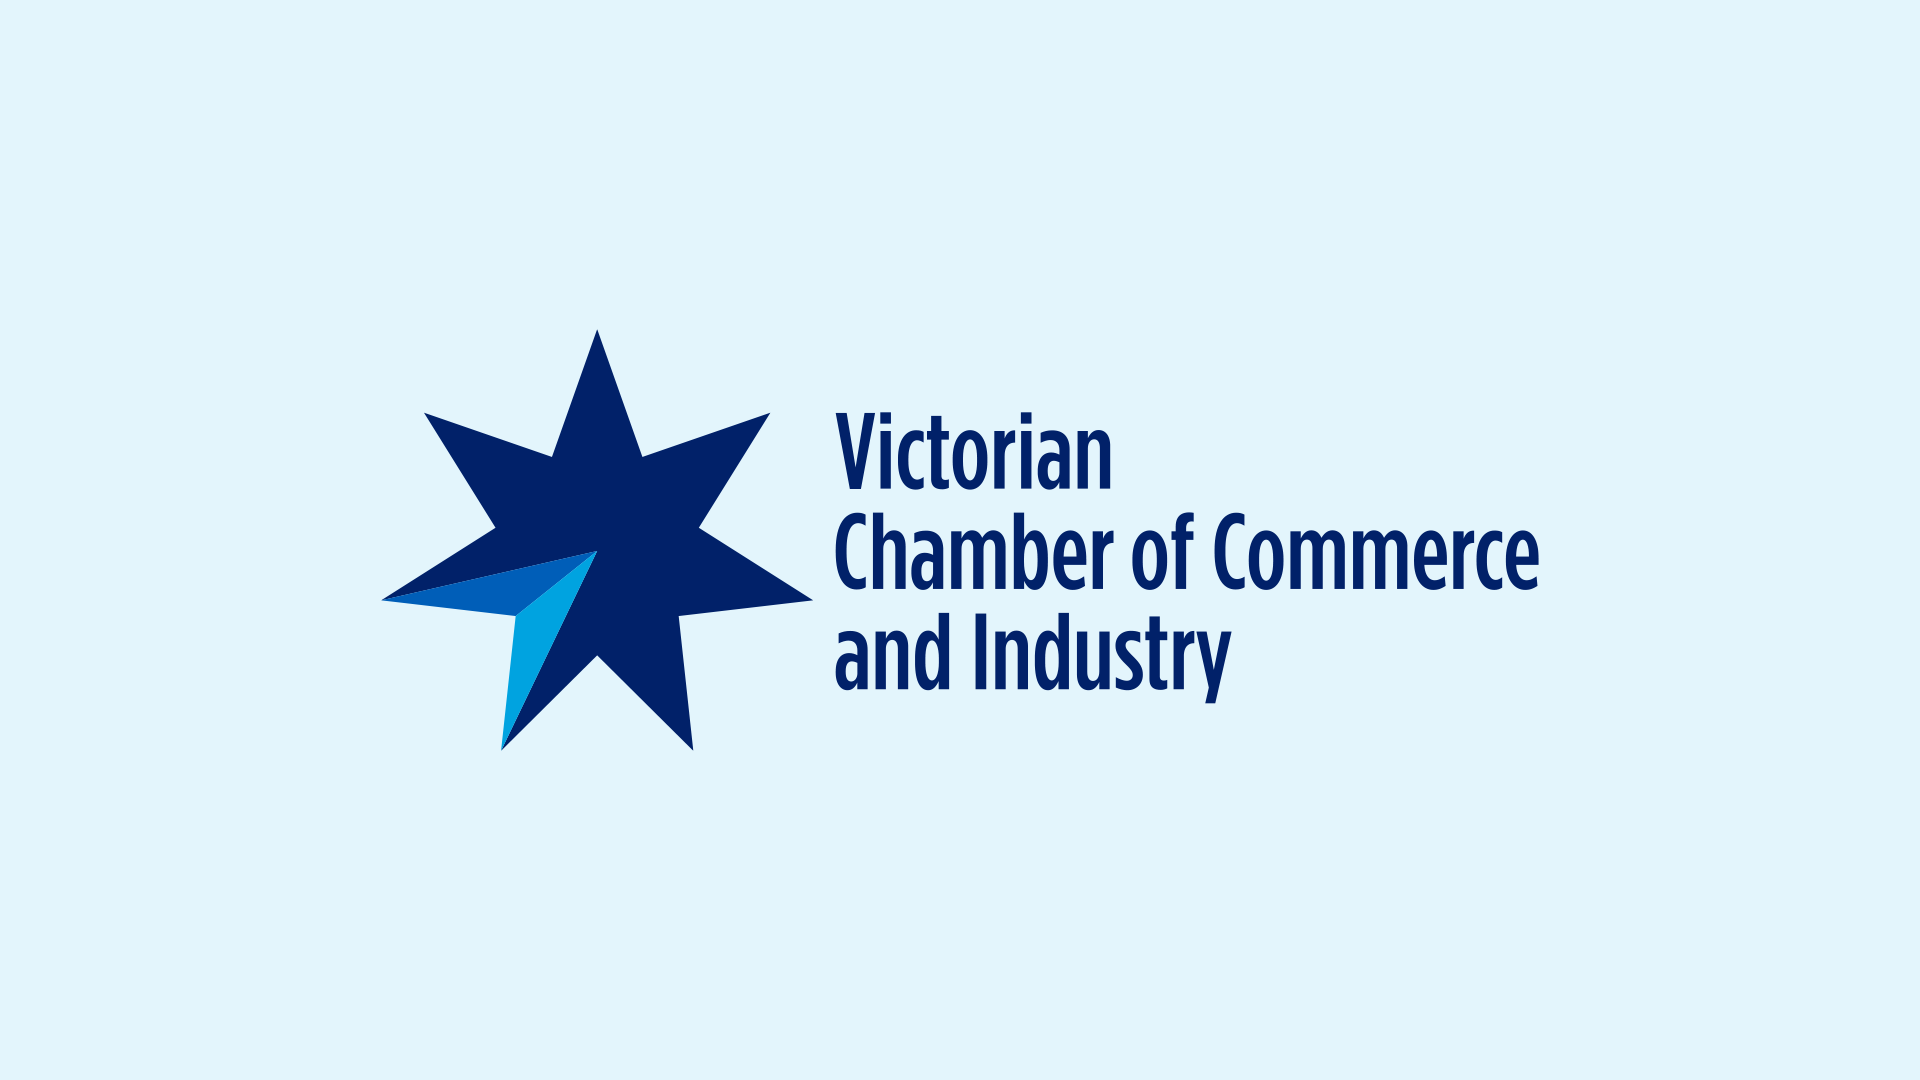 Forced resignation leads to order to pay compensation | Victorian Chamber of Commerce and Industry